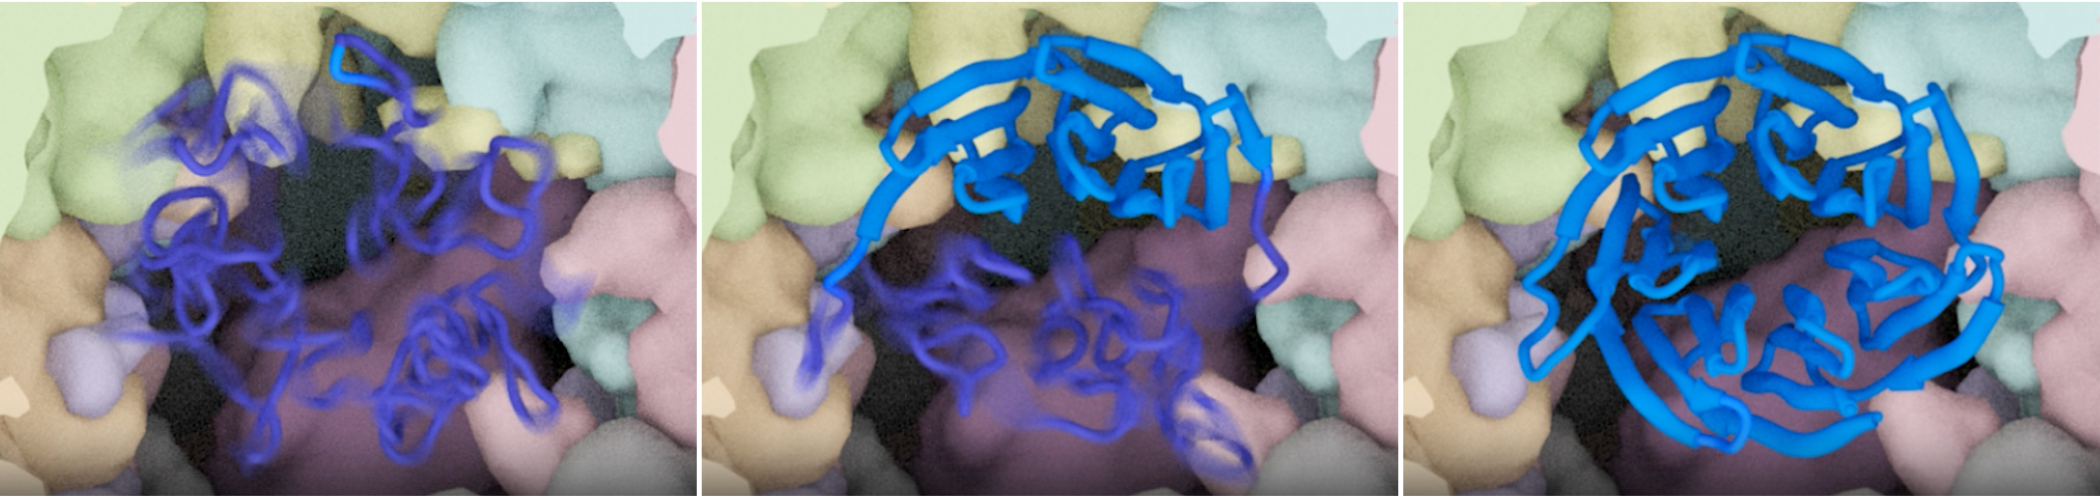 Three panels showing progressive folding of a protein by its chaperone, from a disorganized tangle to a symmetrical pinwheel-like structure.